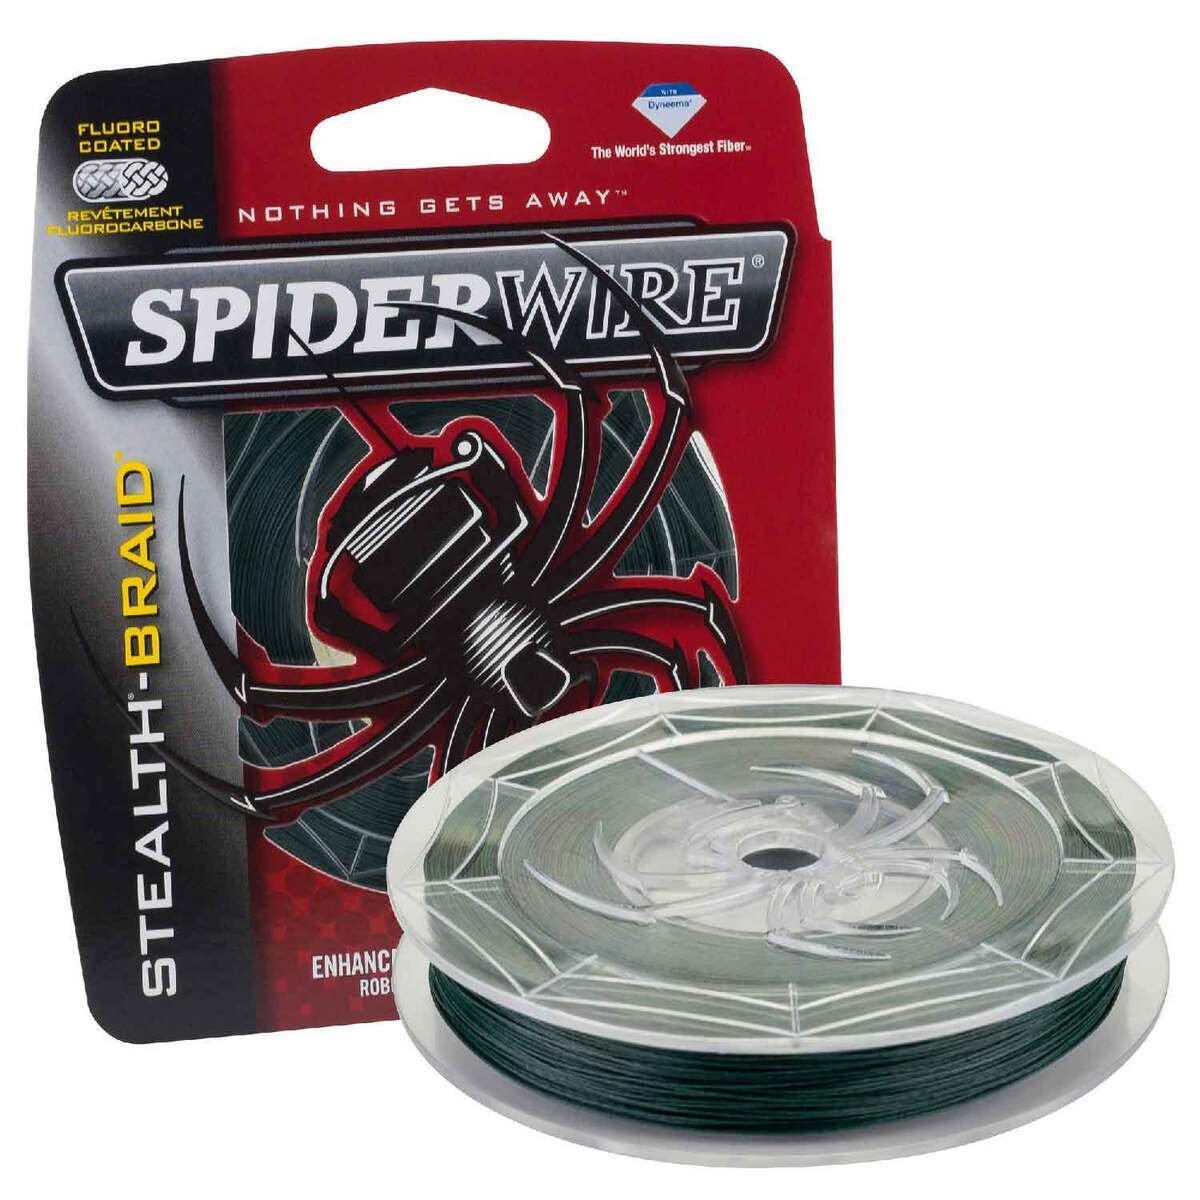 Spiderwire Stealth Braided Fishing Line - 100lb, Moss Green